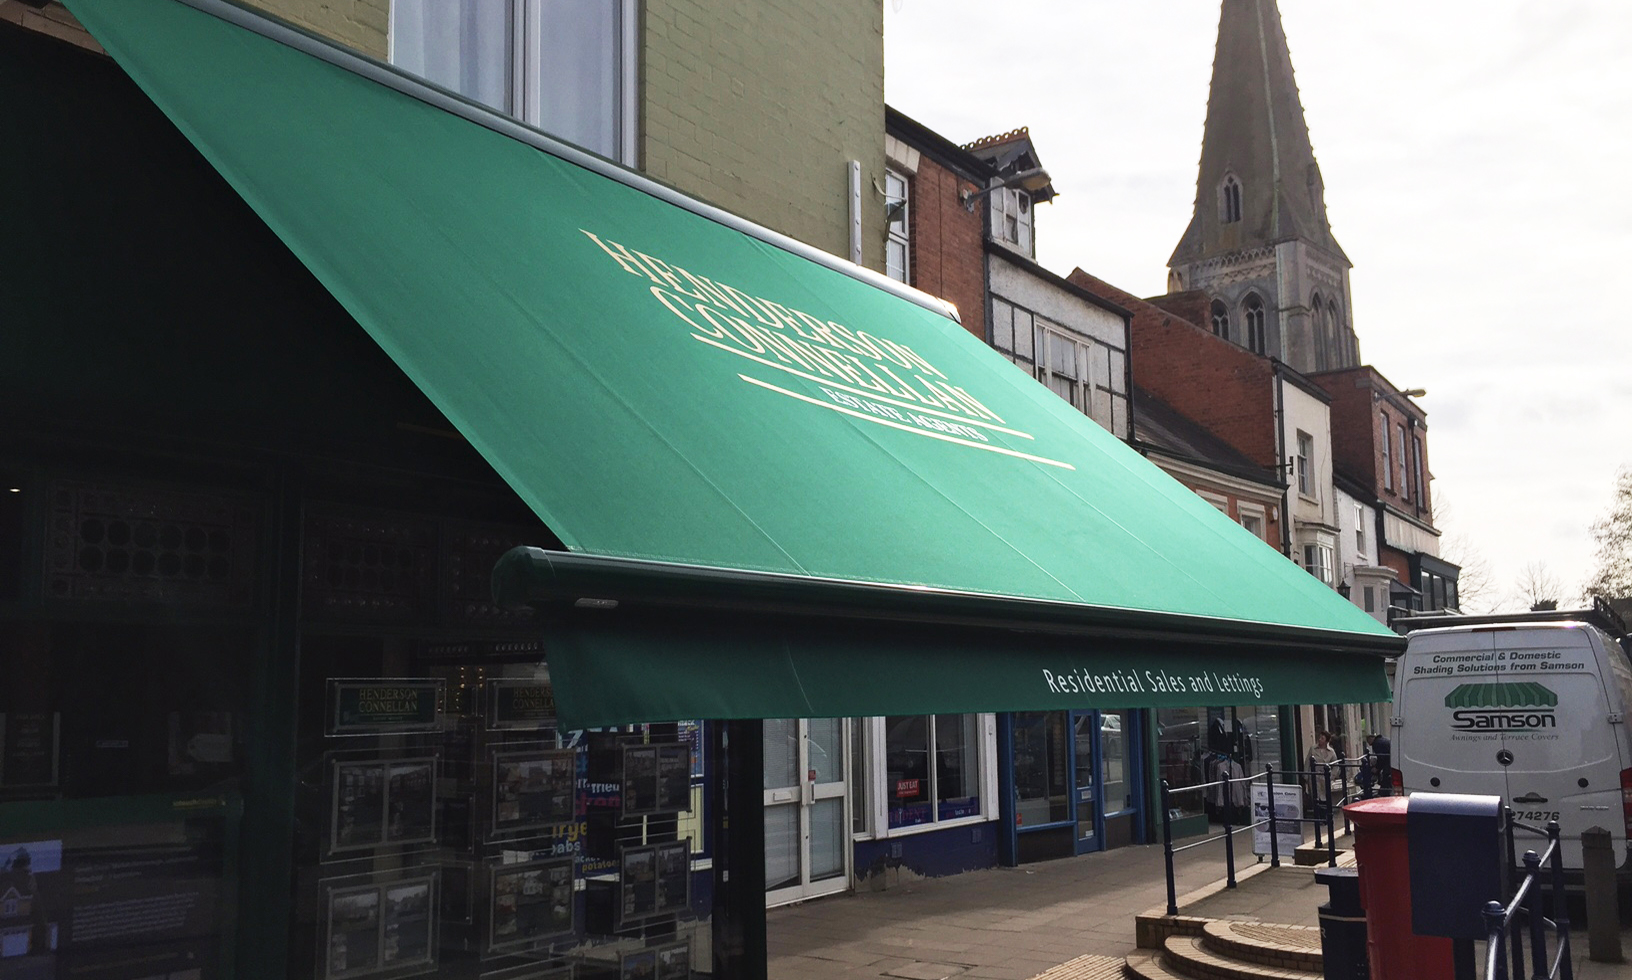 Logos and lettering on fabric awnings